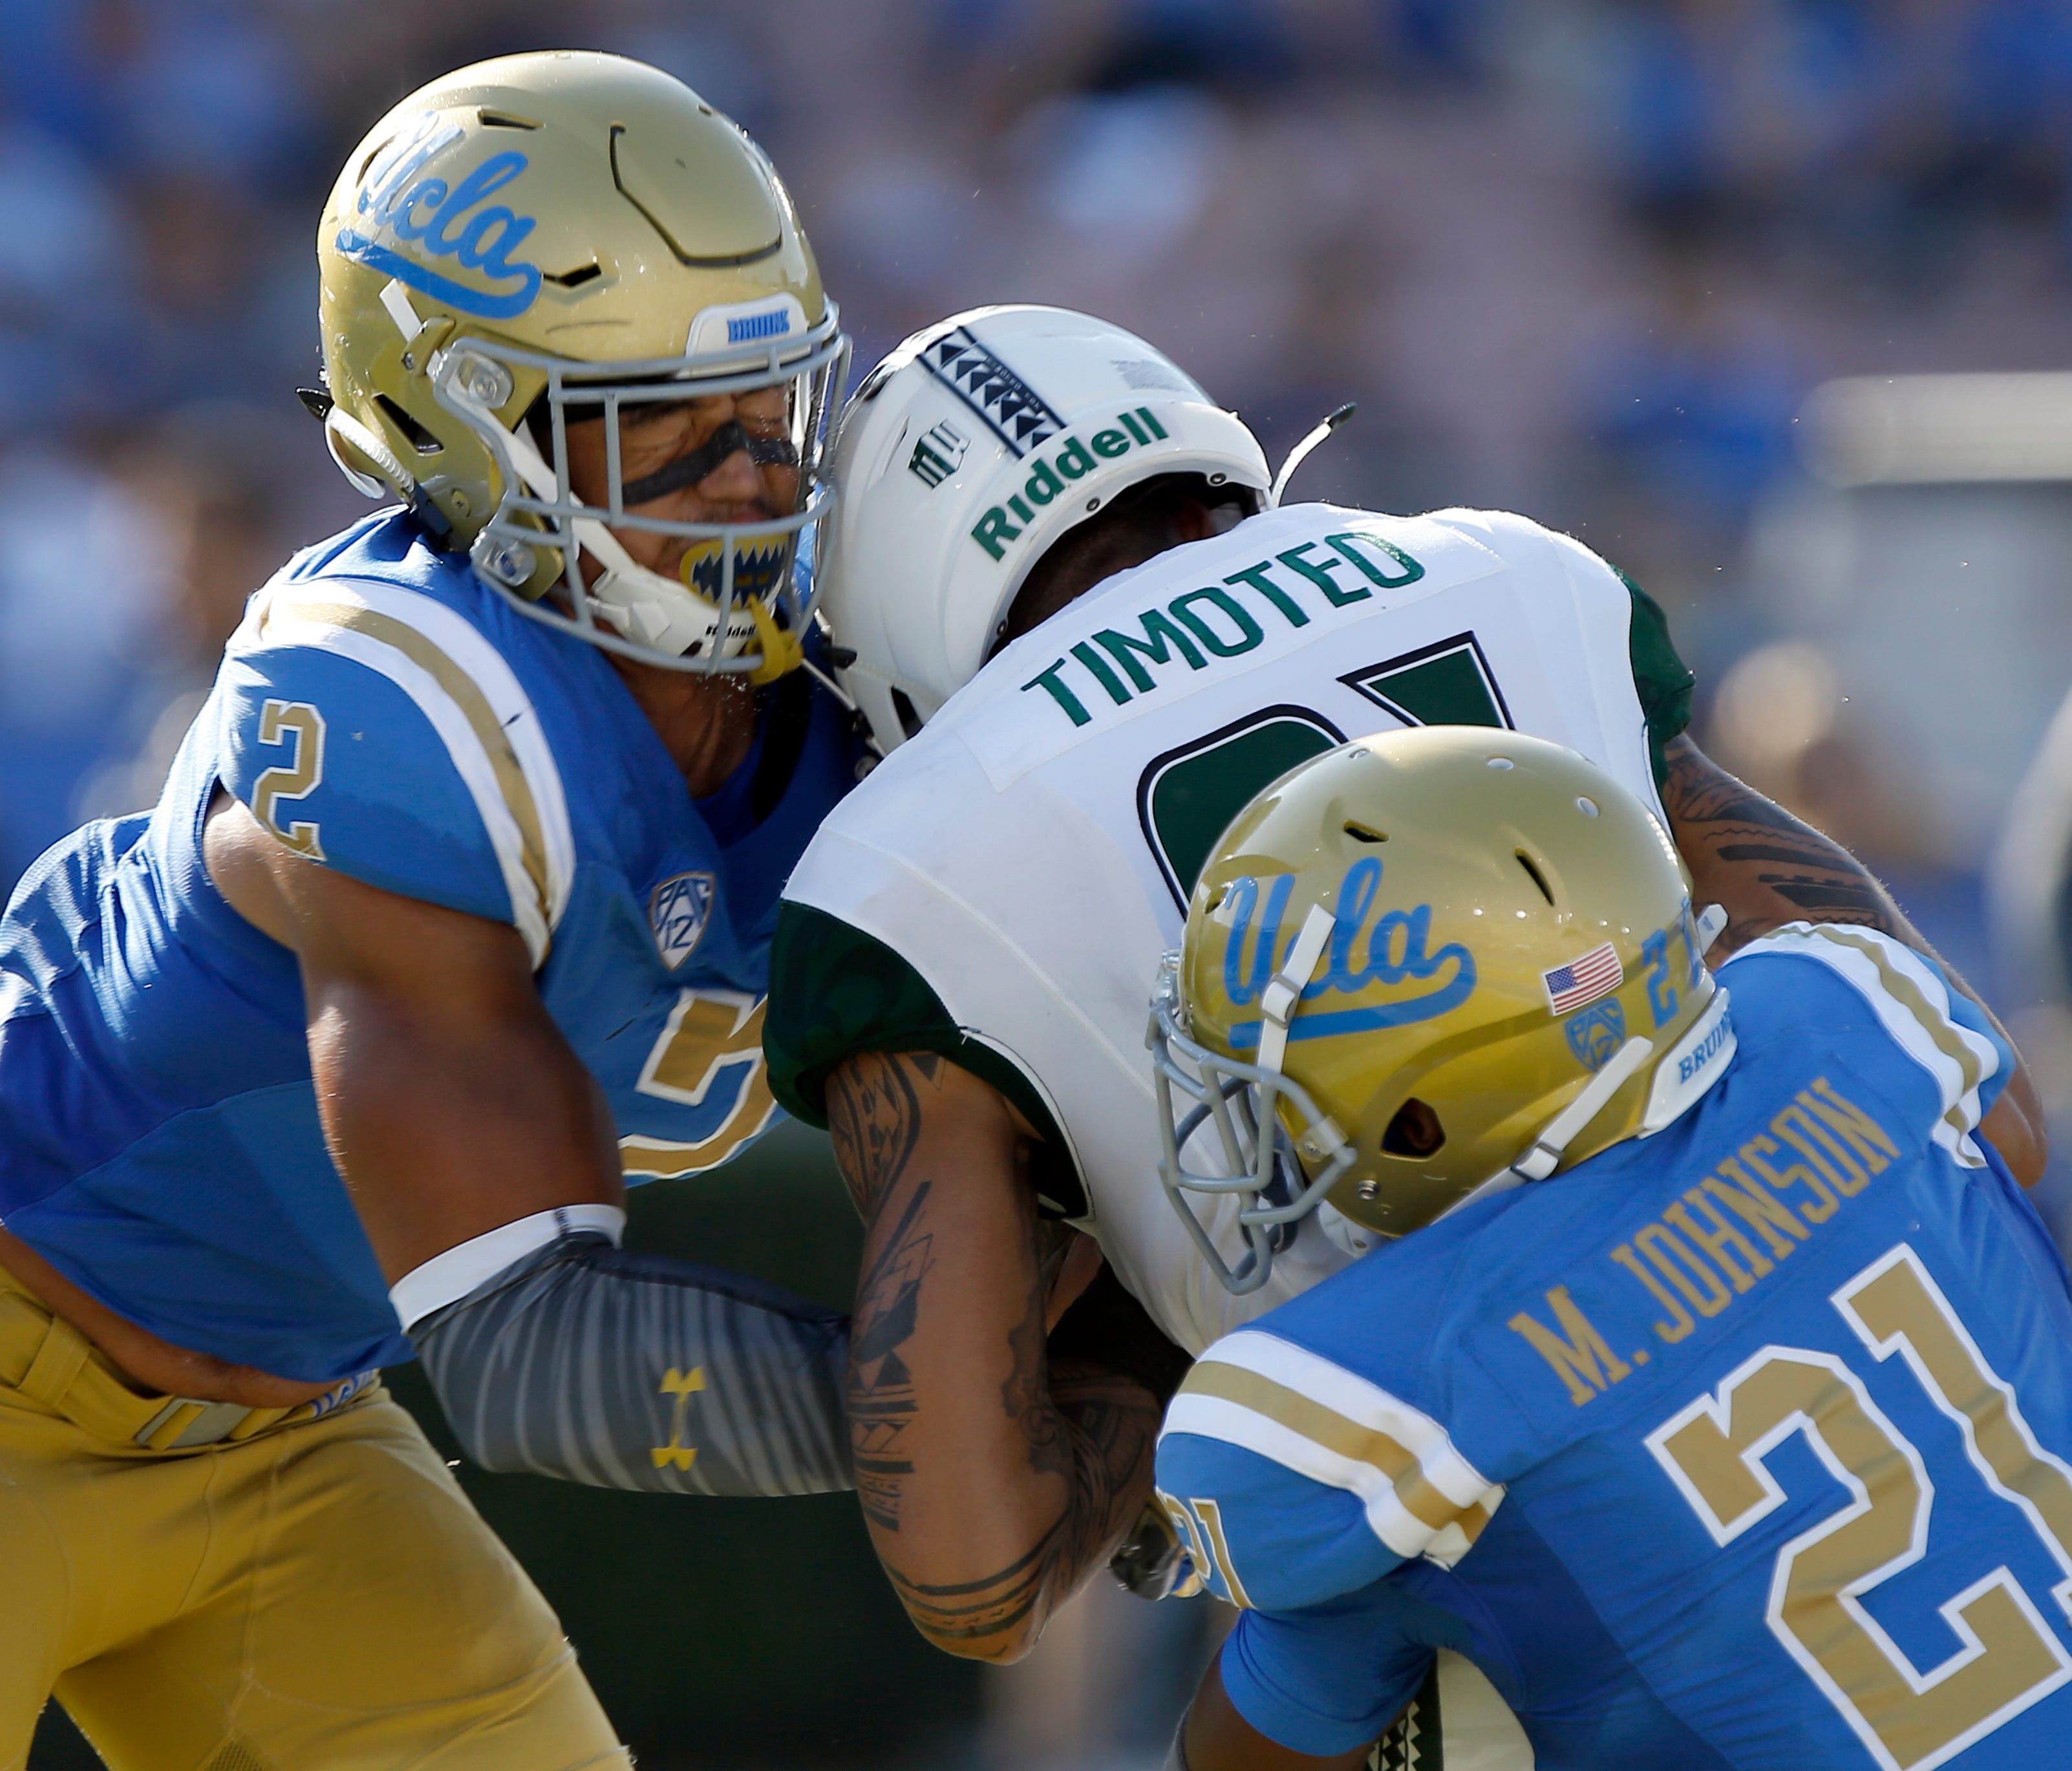 In this Sept. 9, 2017, file photo, Hawaii wide receiver Kalakaua Timoteo, center, drops the ball and gets leveled by UCLA linebacker Josh Woods, left, and hit from behind by defensive back Mossi Johnson (21). Woods was penalized for targeting and eje